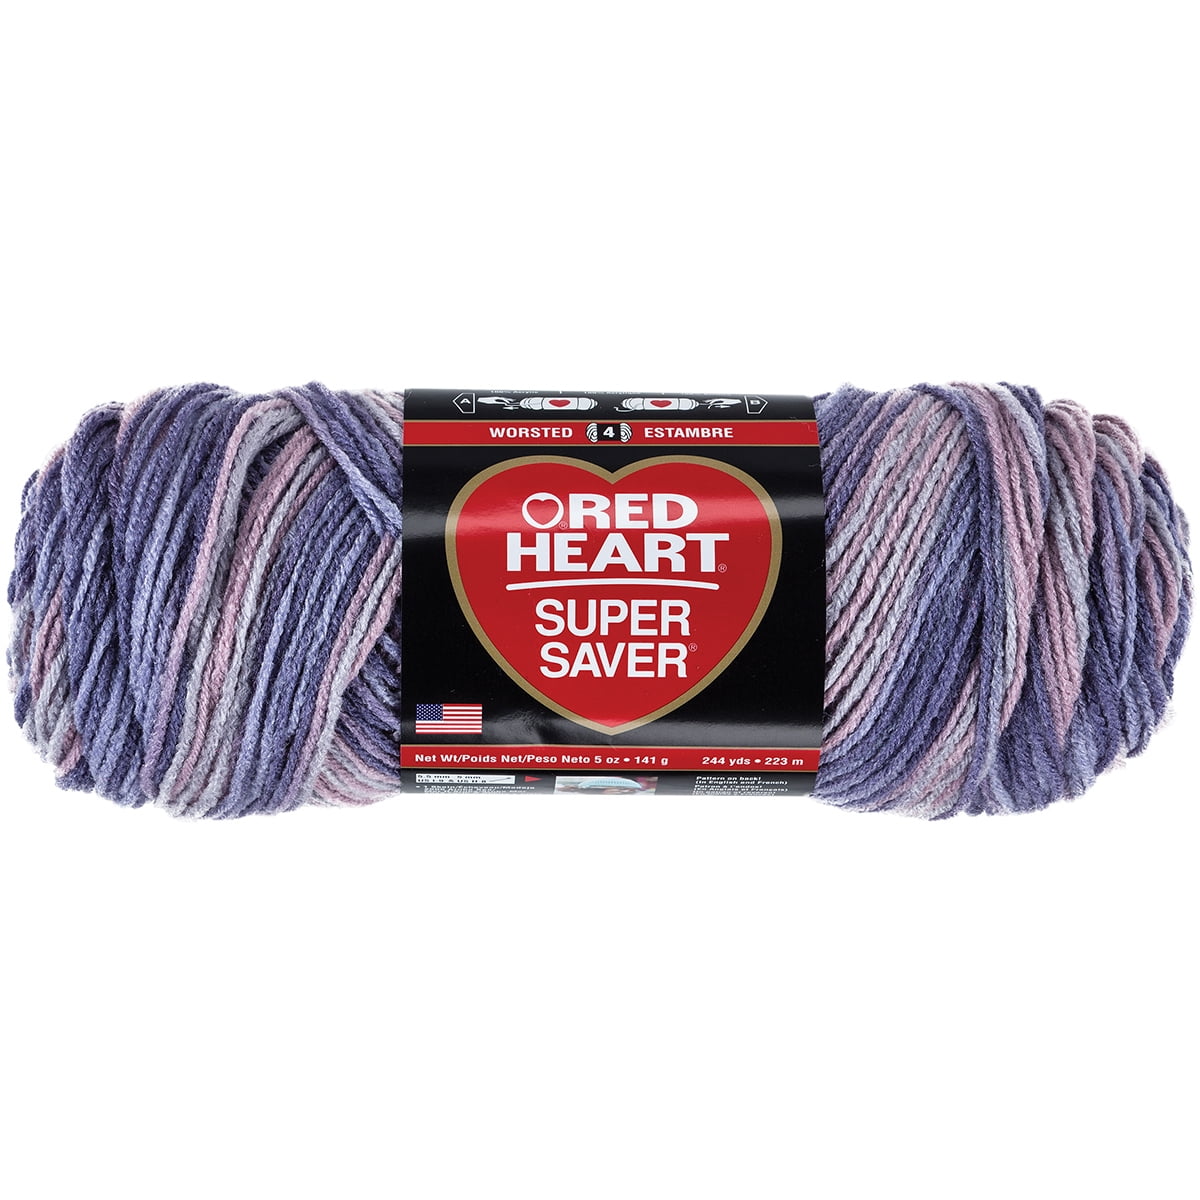 Red Heart Super Saver Yarn-Aran Fleck, 1 count - Smith's Food and Drug